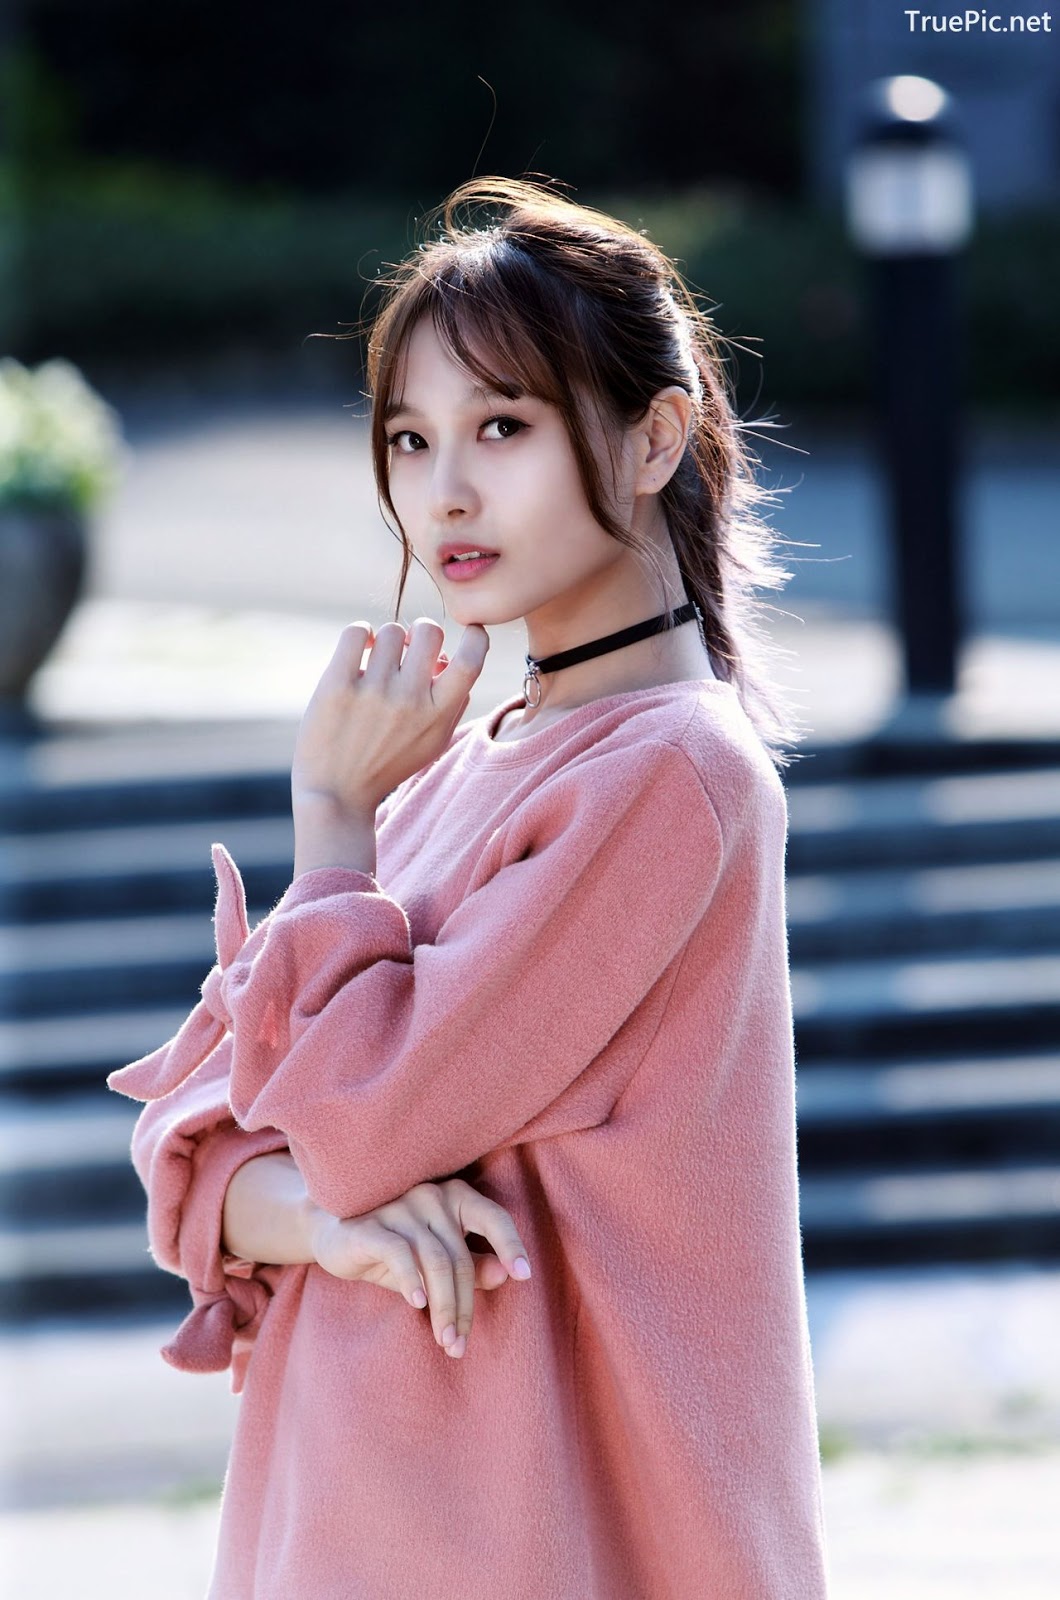 Image-Taiwanese-Model-郭思敏-Pure-And-Gorgeous-Girl-In-Pink-Sweater-Dress-TruePic.net- Picture-52